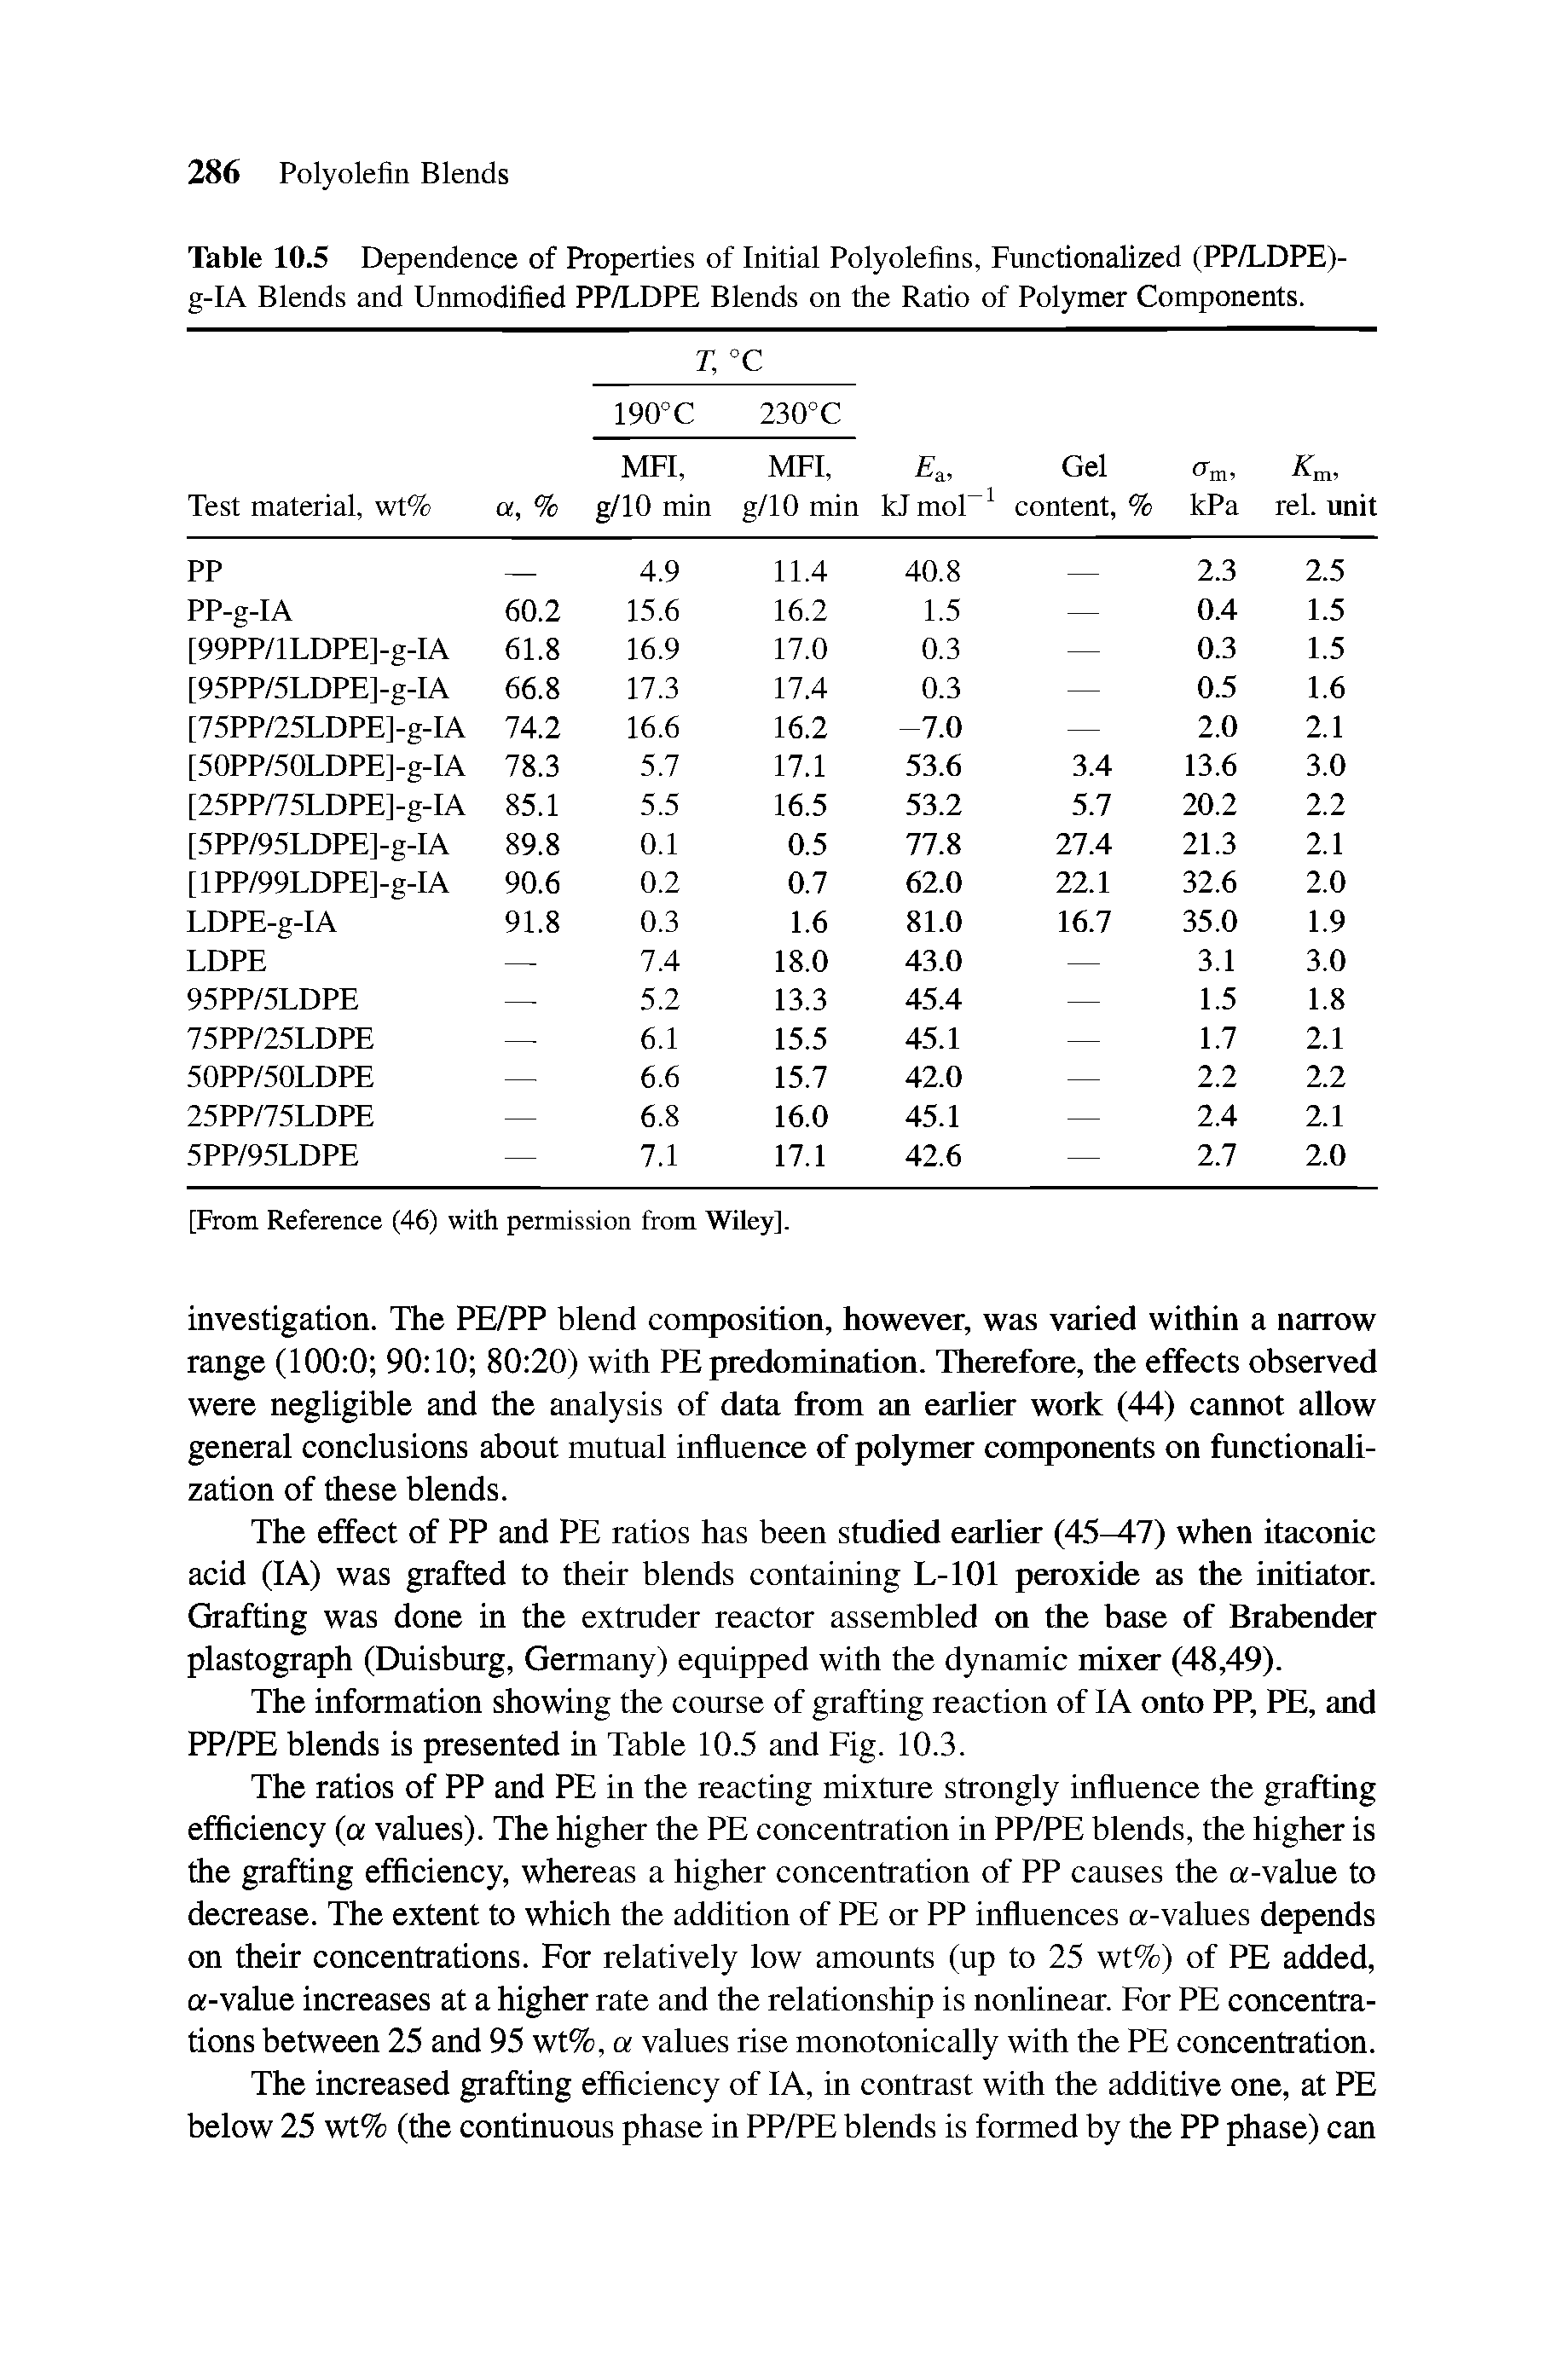 Table 10.5 Dependence of Properties of Initial Polyolefins, Functionalized (PP/LDPE)-g-IA Blends and Unmodified PP/LDPE Blends on the Ratio of Polymer Components.